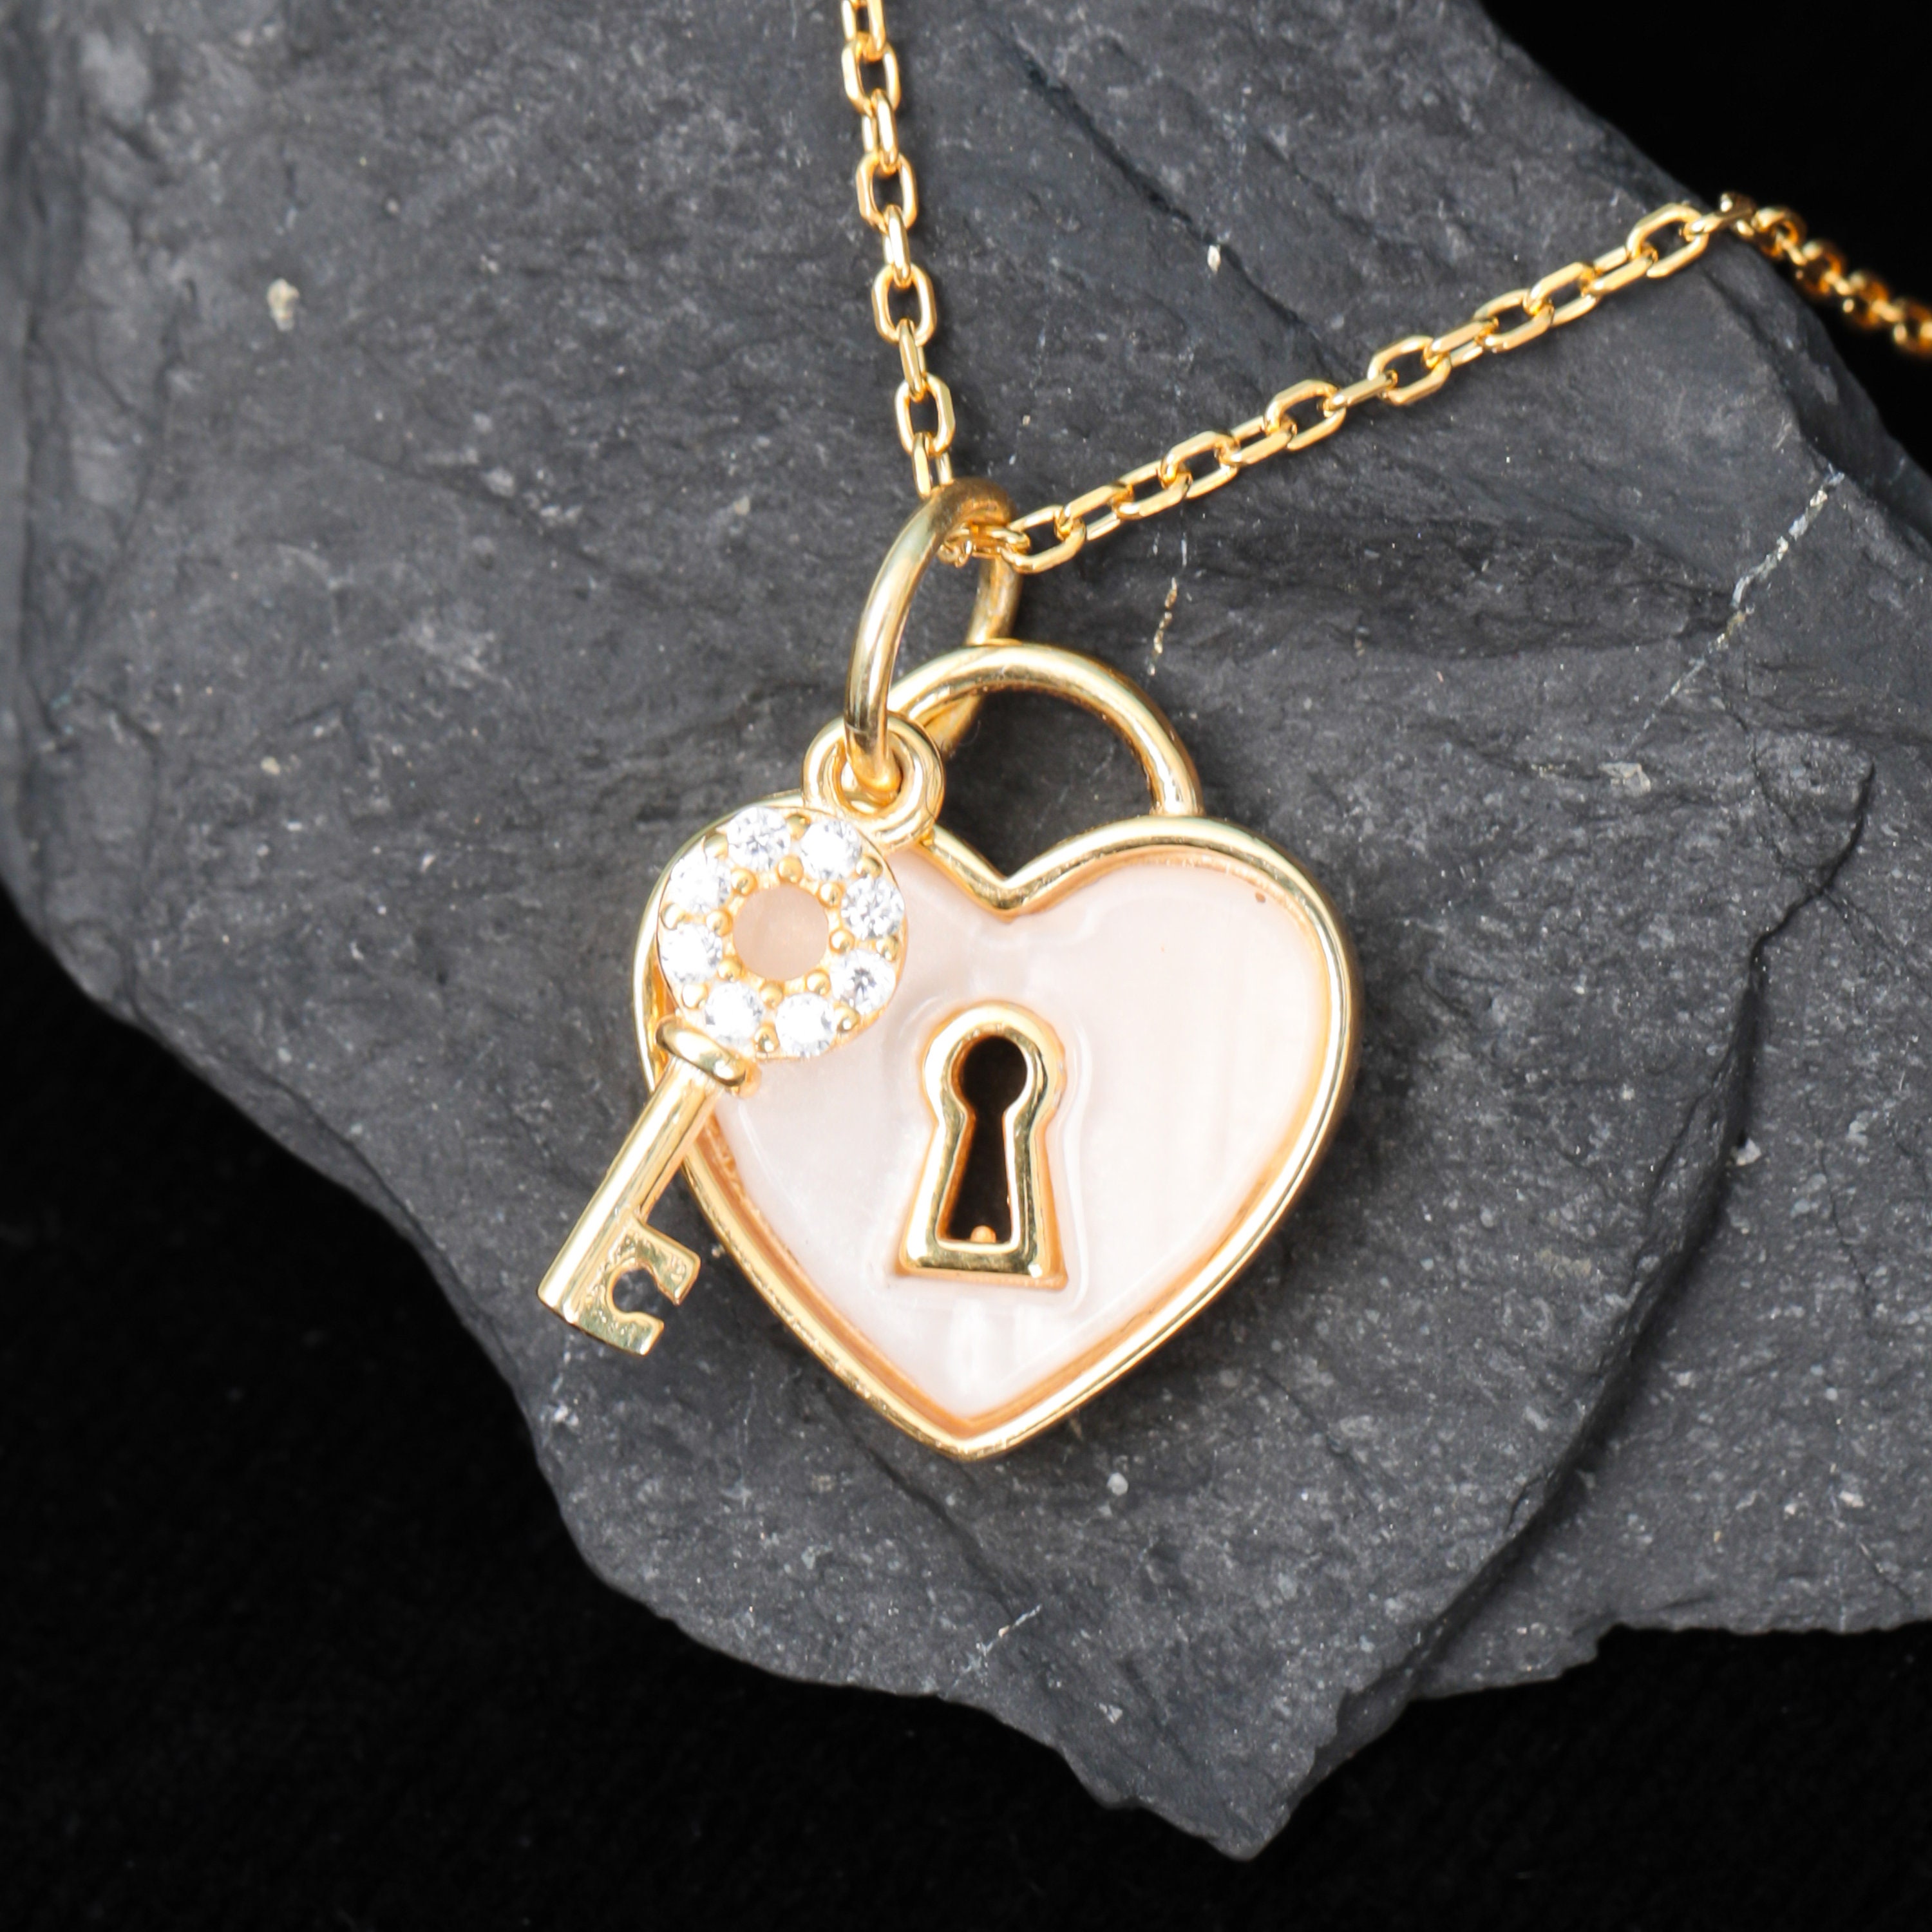 Heart Lock and Key Bracelet by Morse and Dainty